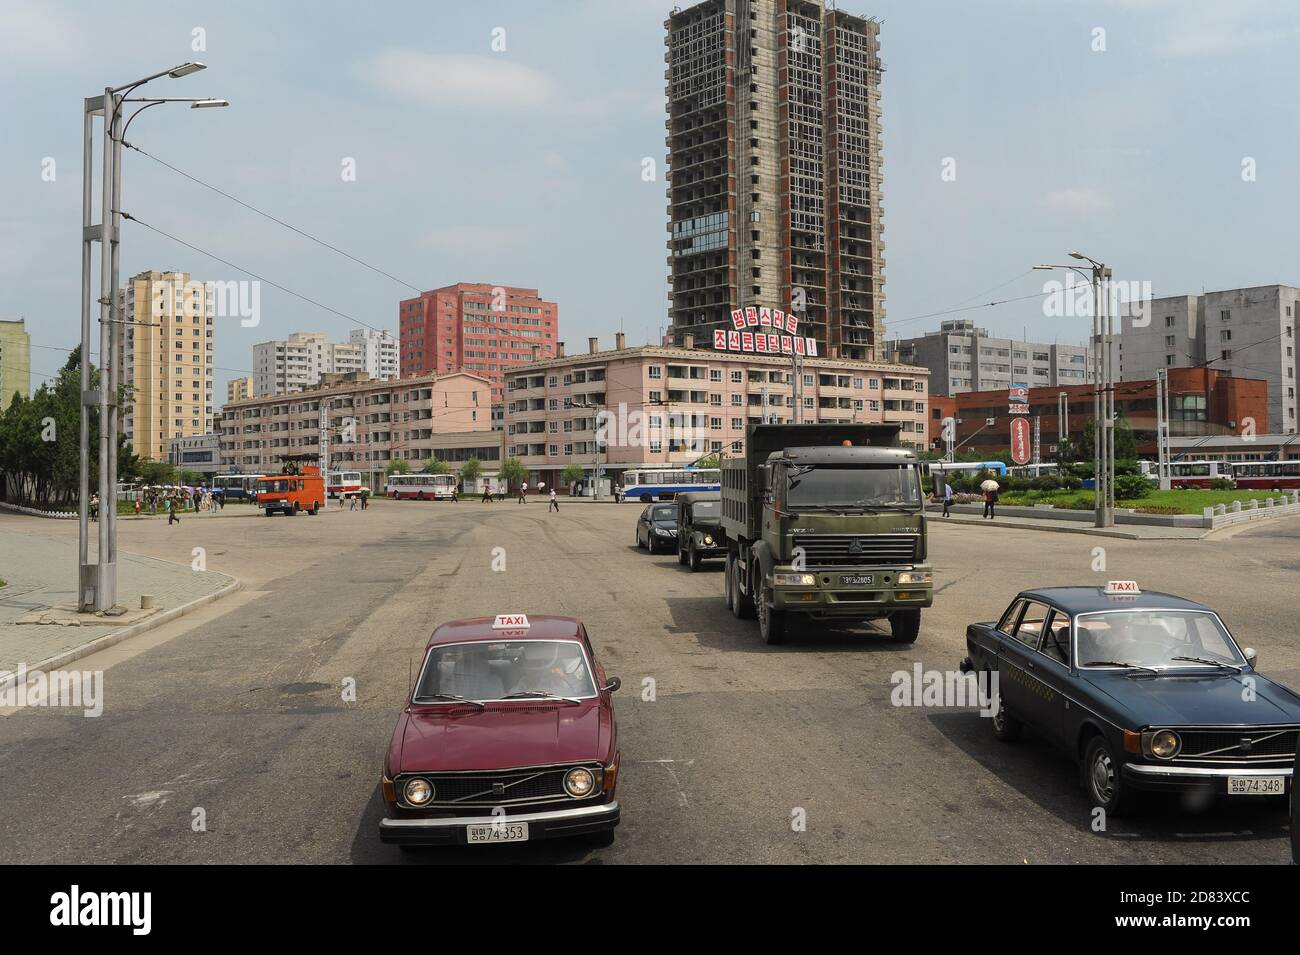 08.08.2012, Pyongyang, North Korea, Asia - An everyday street scene with road traffic and buildings in the centre of the North Korean capital city. Stock Photo